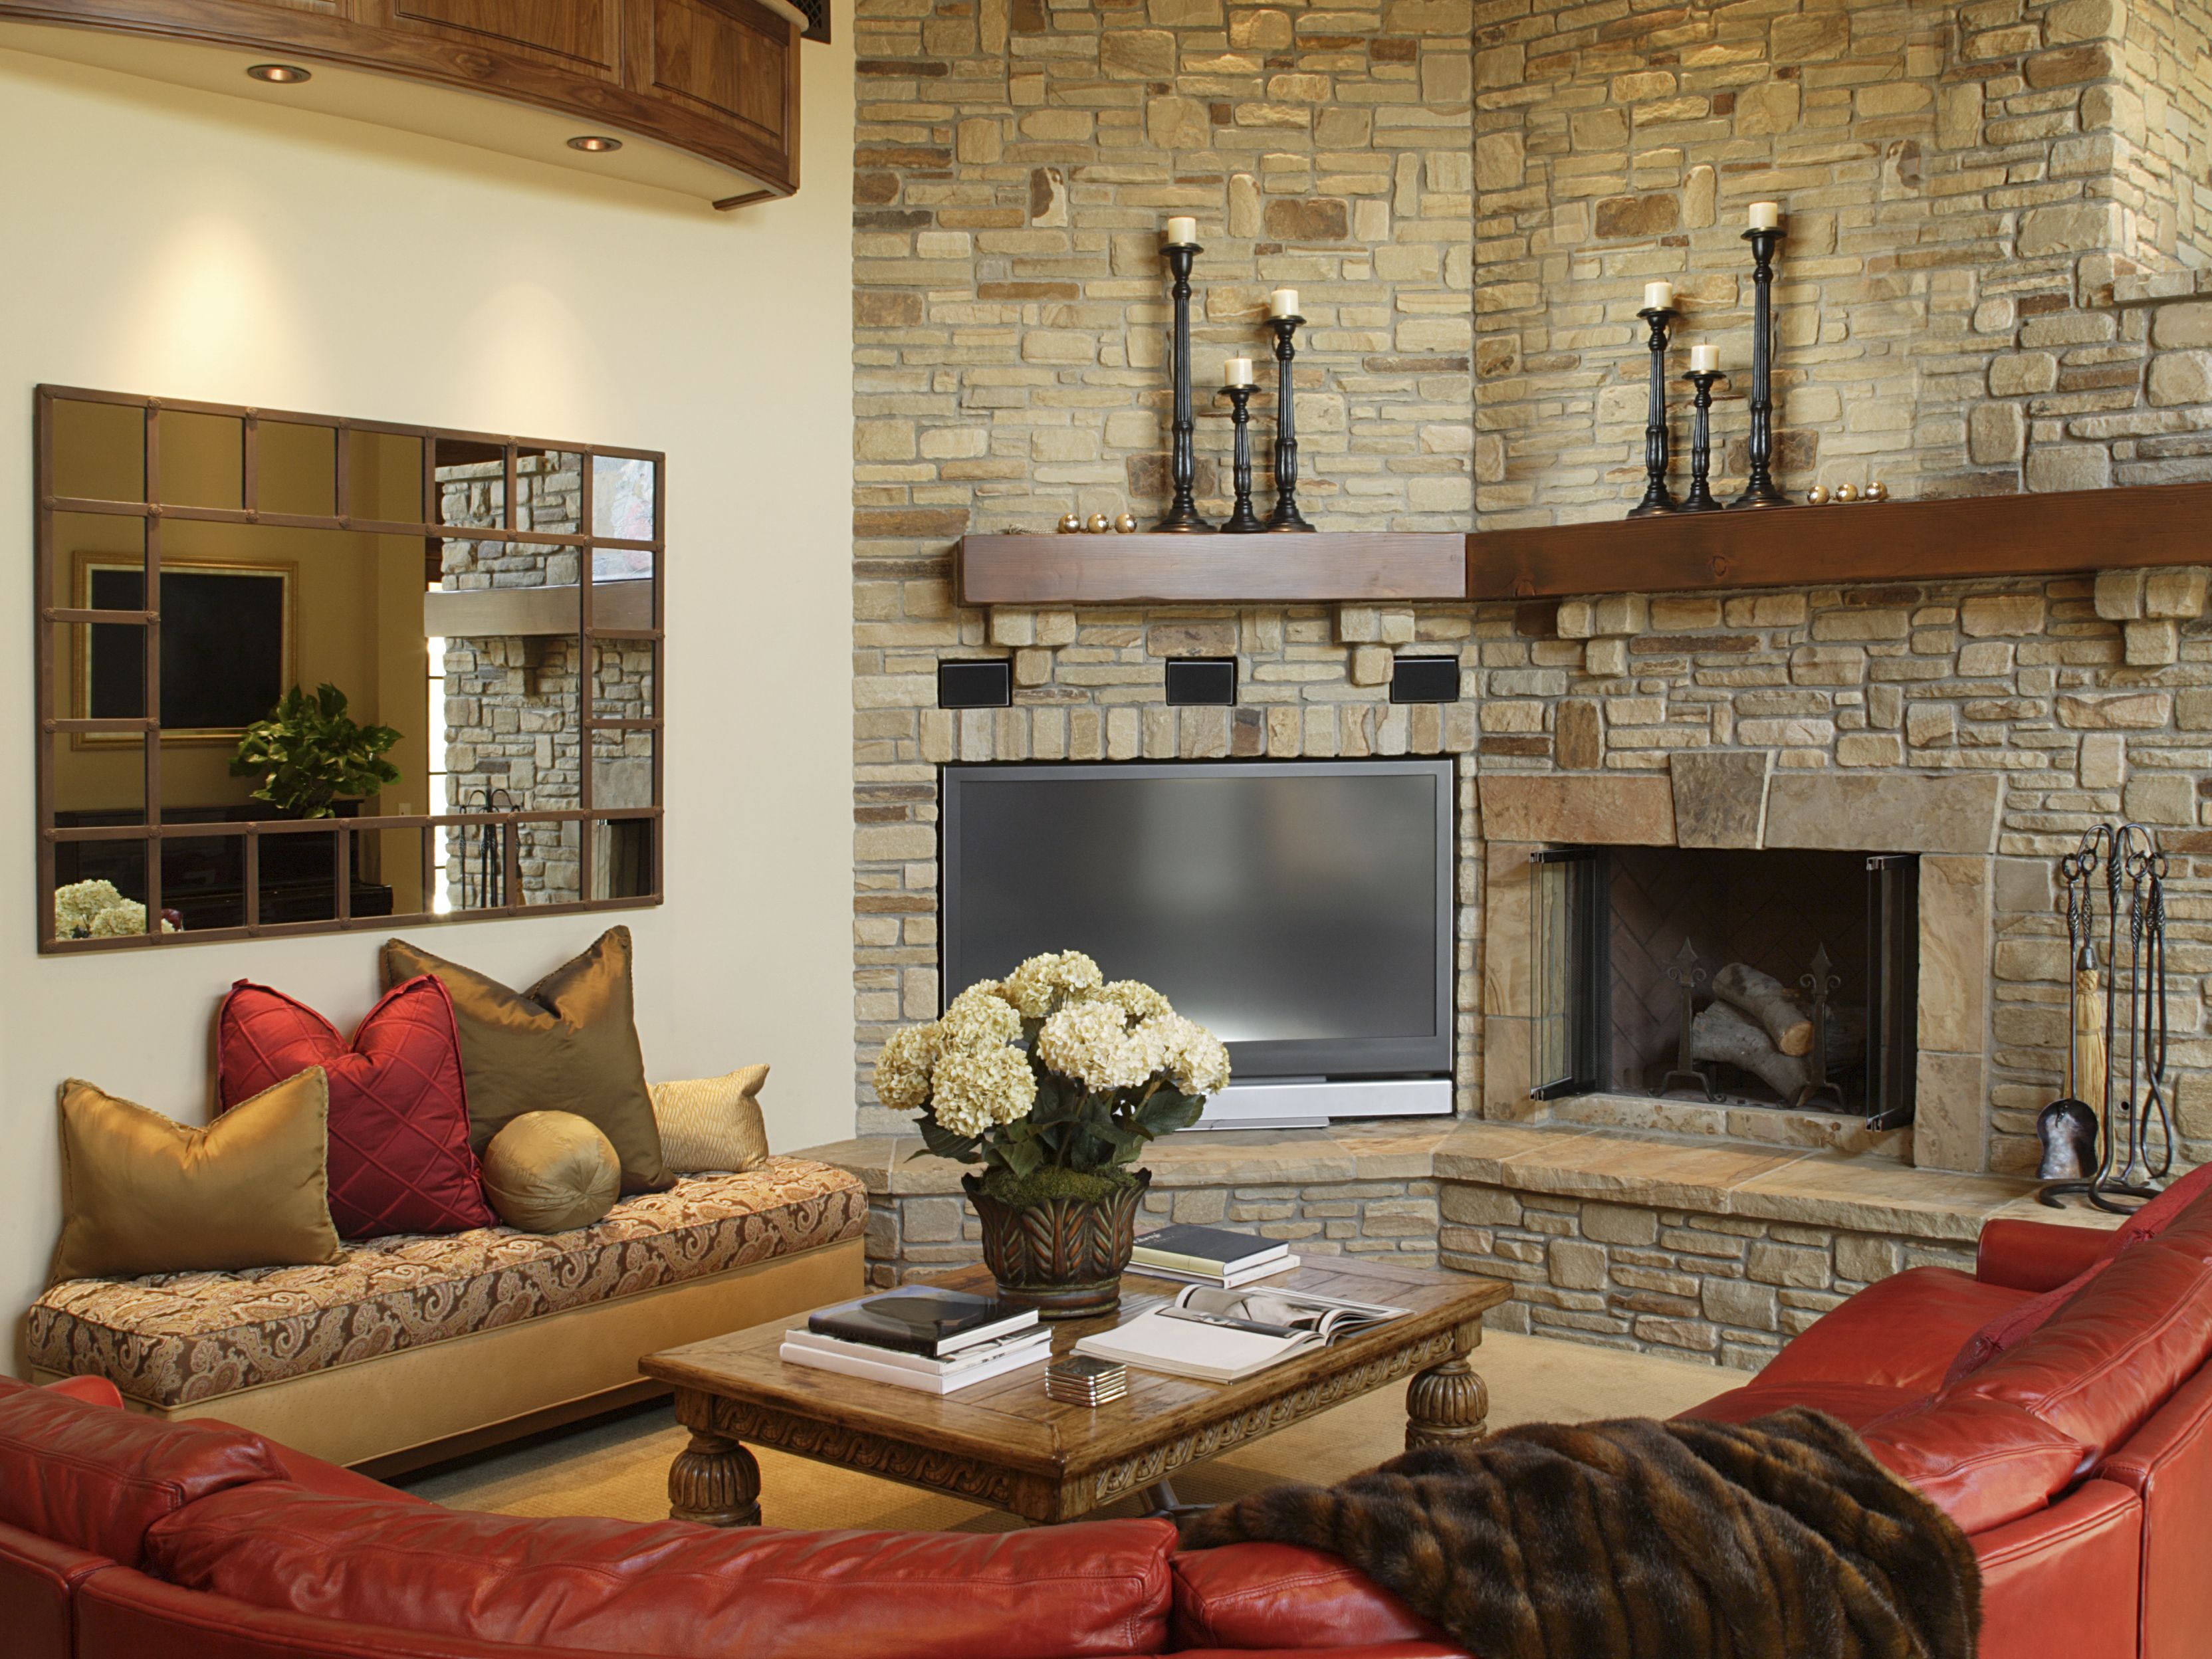 Adding A Fireplace to An Interior Wall New Manufactured Stone Veneer What to Know before You Buy